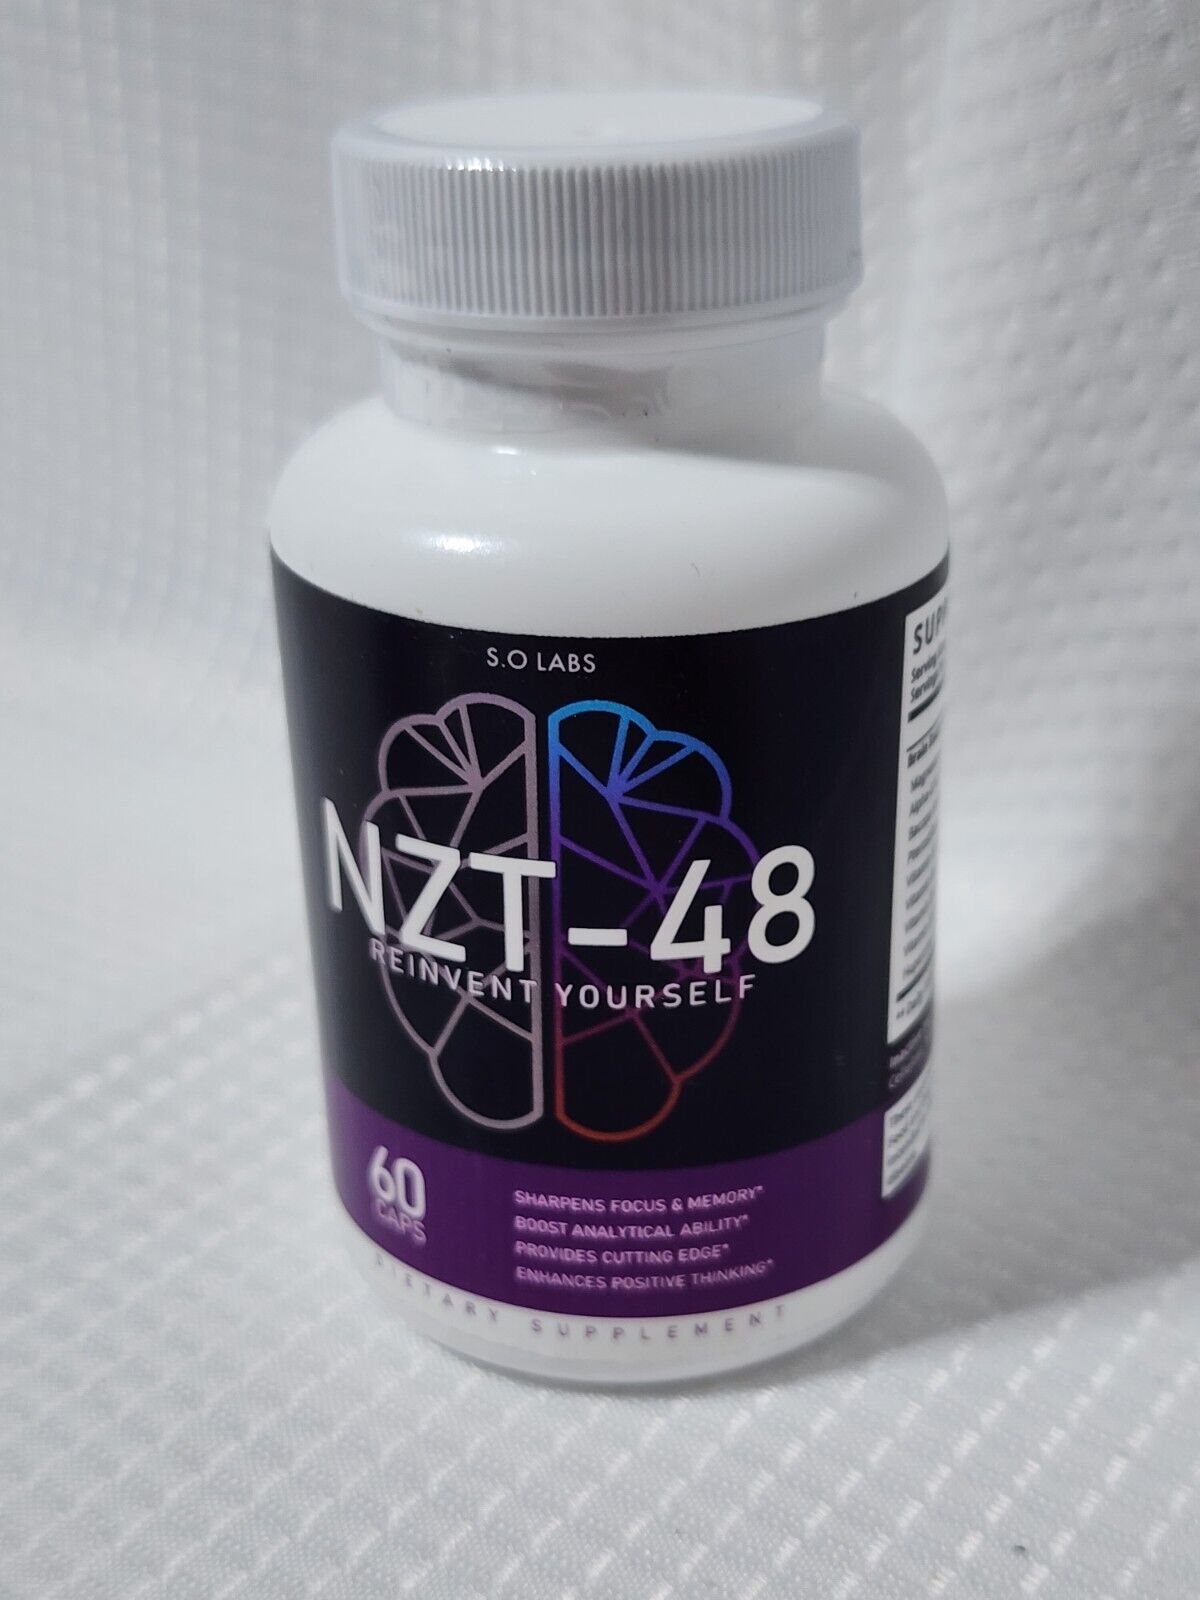 Primary image for NZT-48 Brain Booster - Focus, Memory, Function (1-Bottle, 60ct) - EXP 12/2024